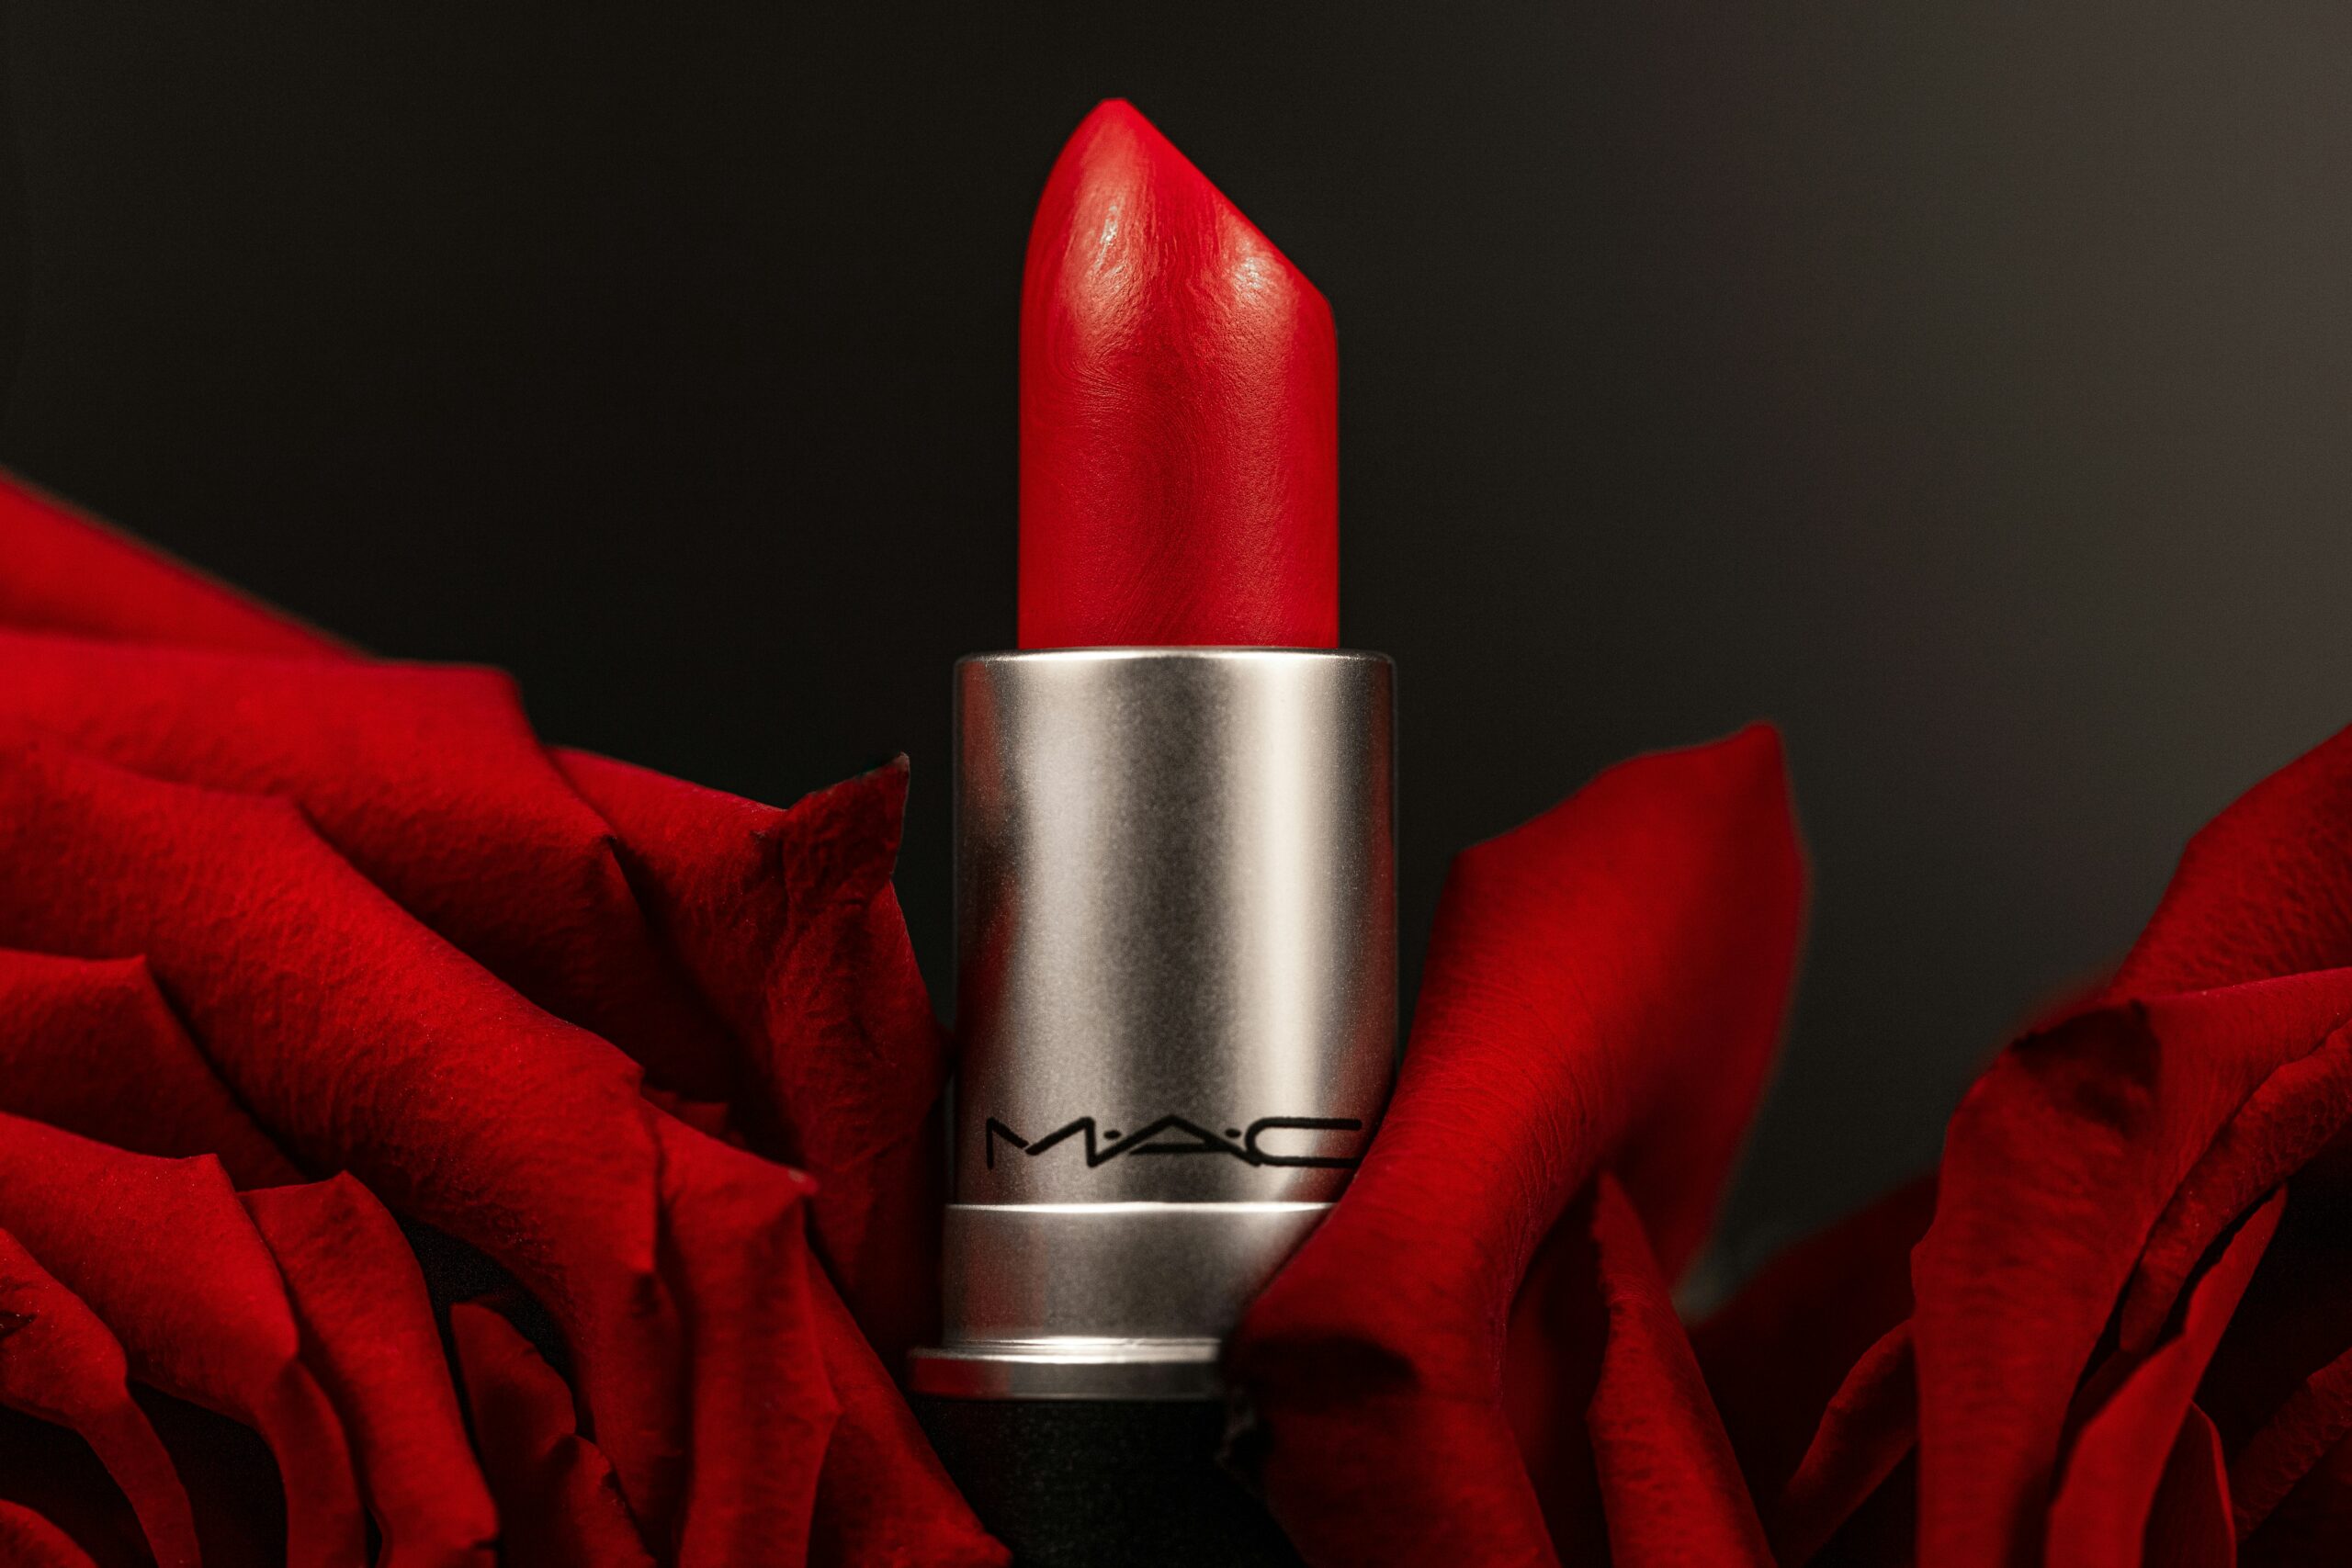 The “1 Million THANK YOUS” MAC Lipstick Giveaway